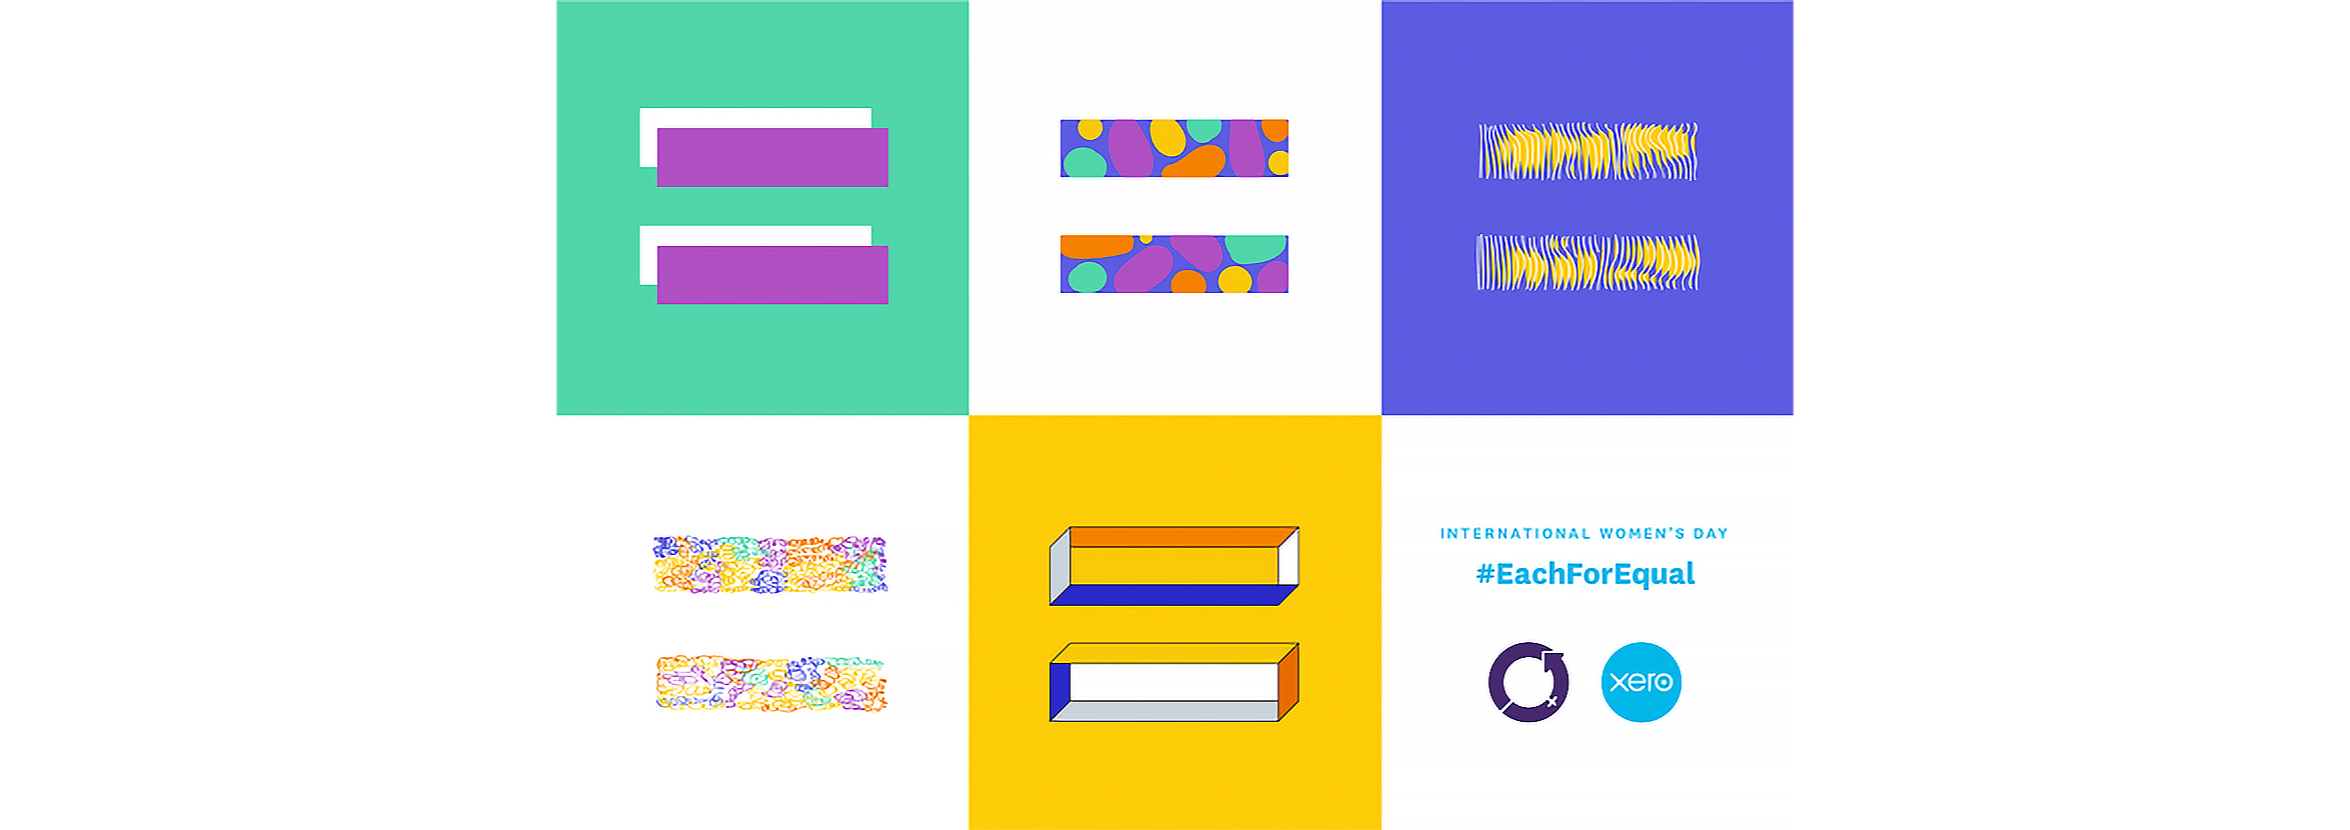 Abstract rectangular illustrations in bright colours and the International Women’s Day logo with the words ‘Each for equal’.